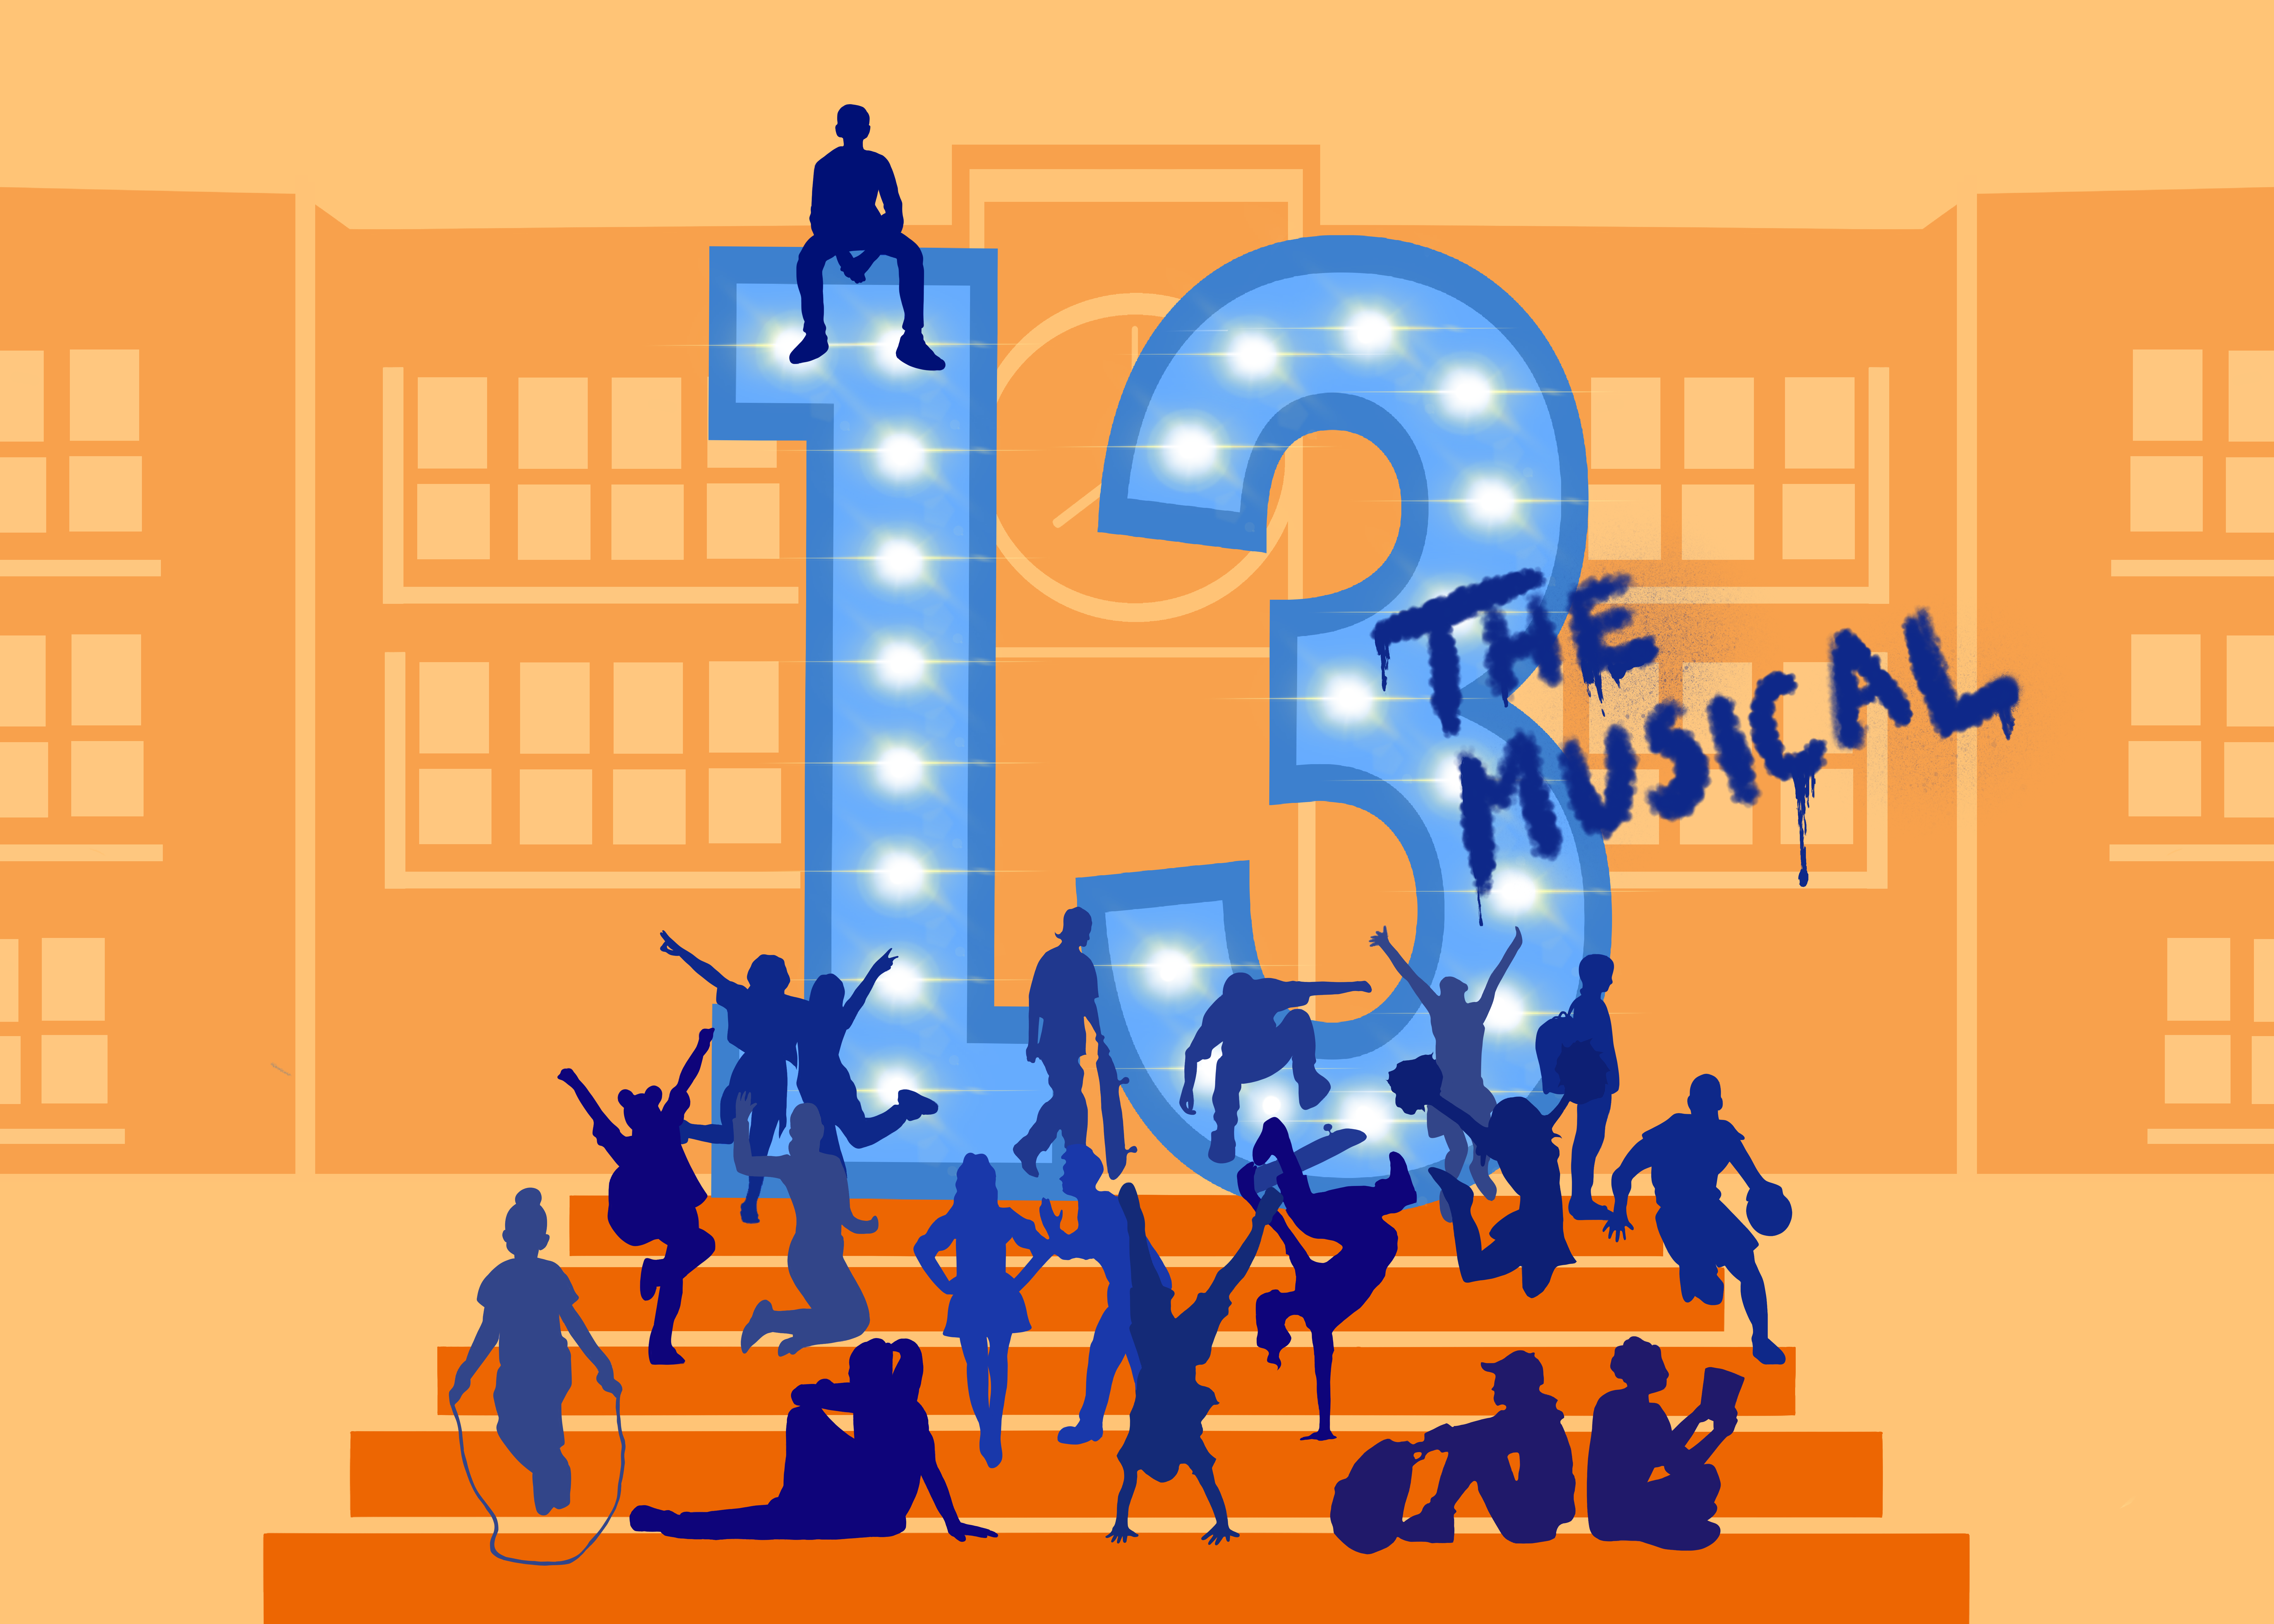 A cartoon image of a variety of children standing, sitting, jumping rope and more on an orange staircase. Thirteen are printed in huge numbers, and scrawled on them is "the musical". In the background is a large school-like building.